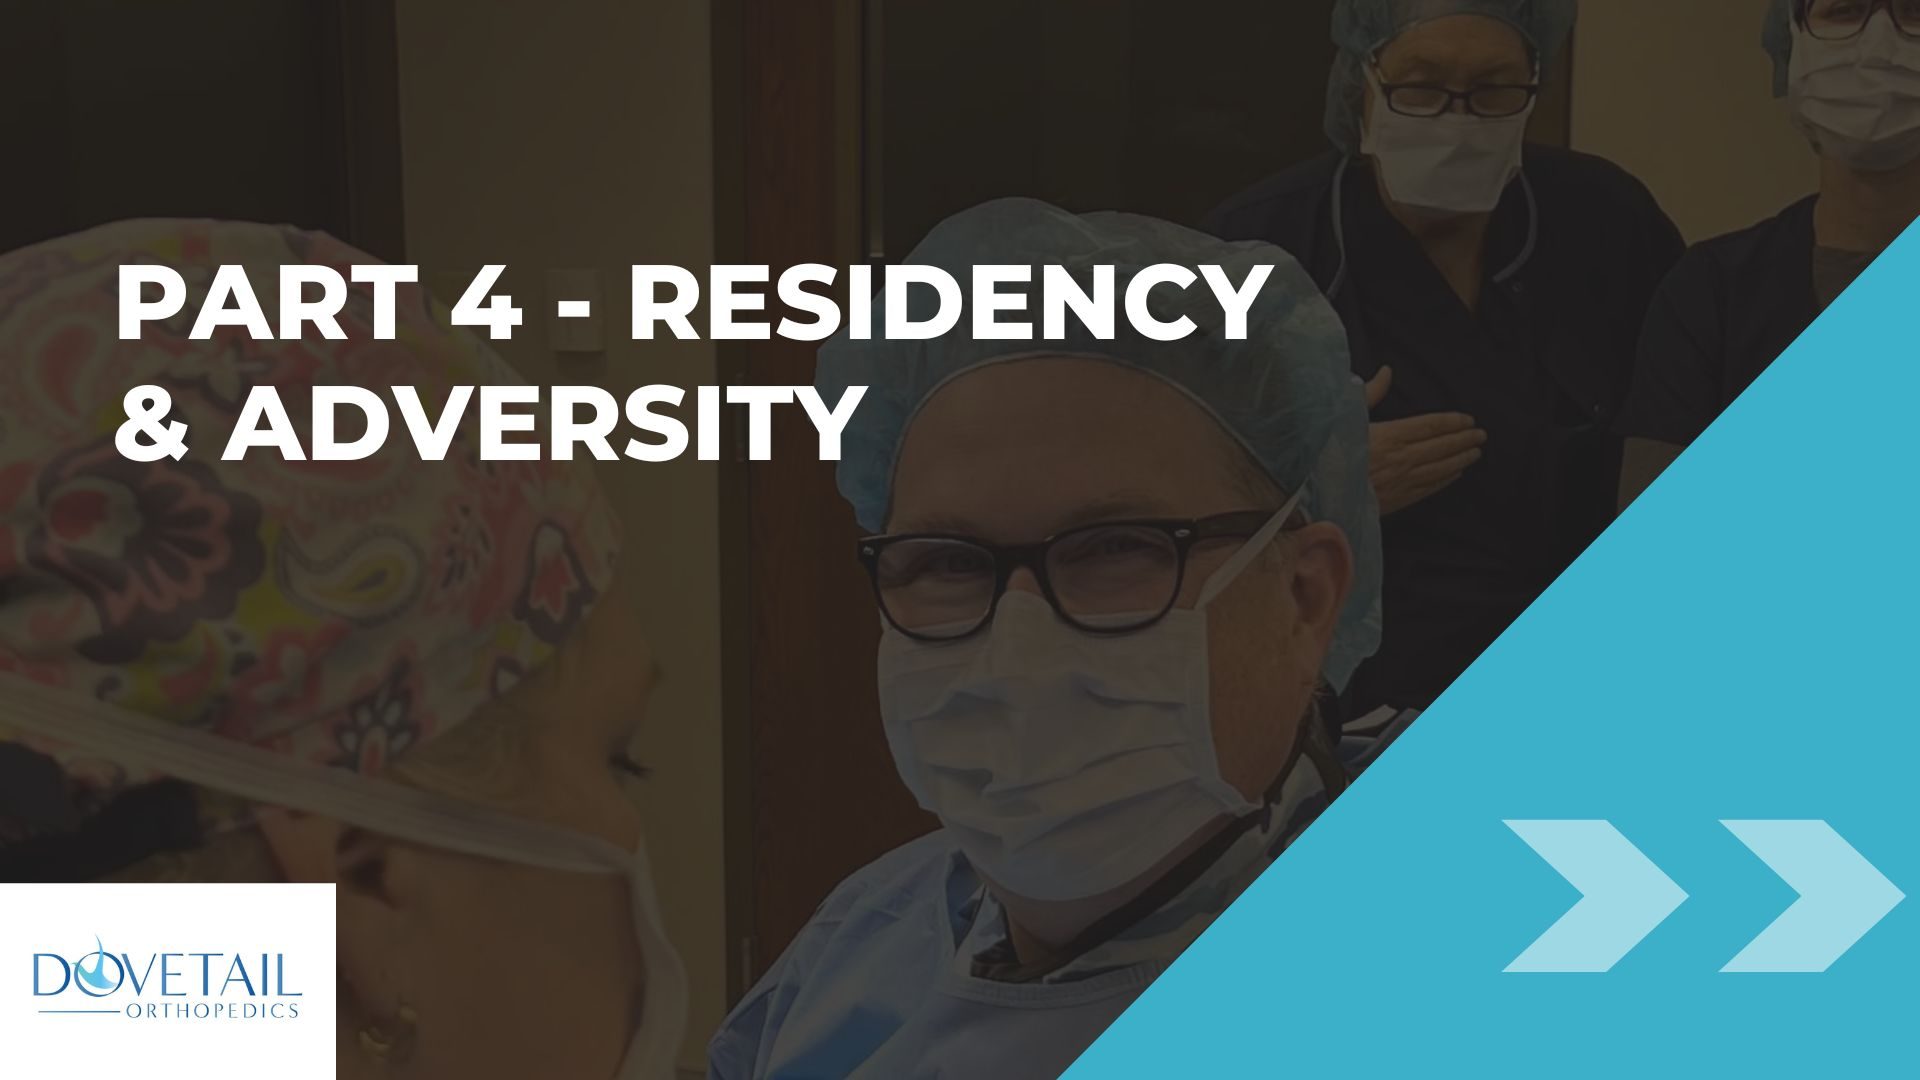 Surgeon in scrubs with colleagues in the background, Dovetail Orthopedics Part 4 - Residency & Adversity banner